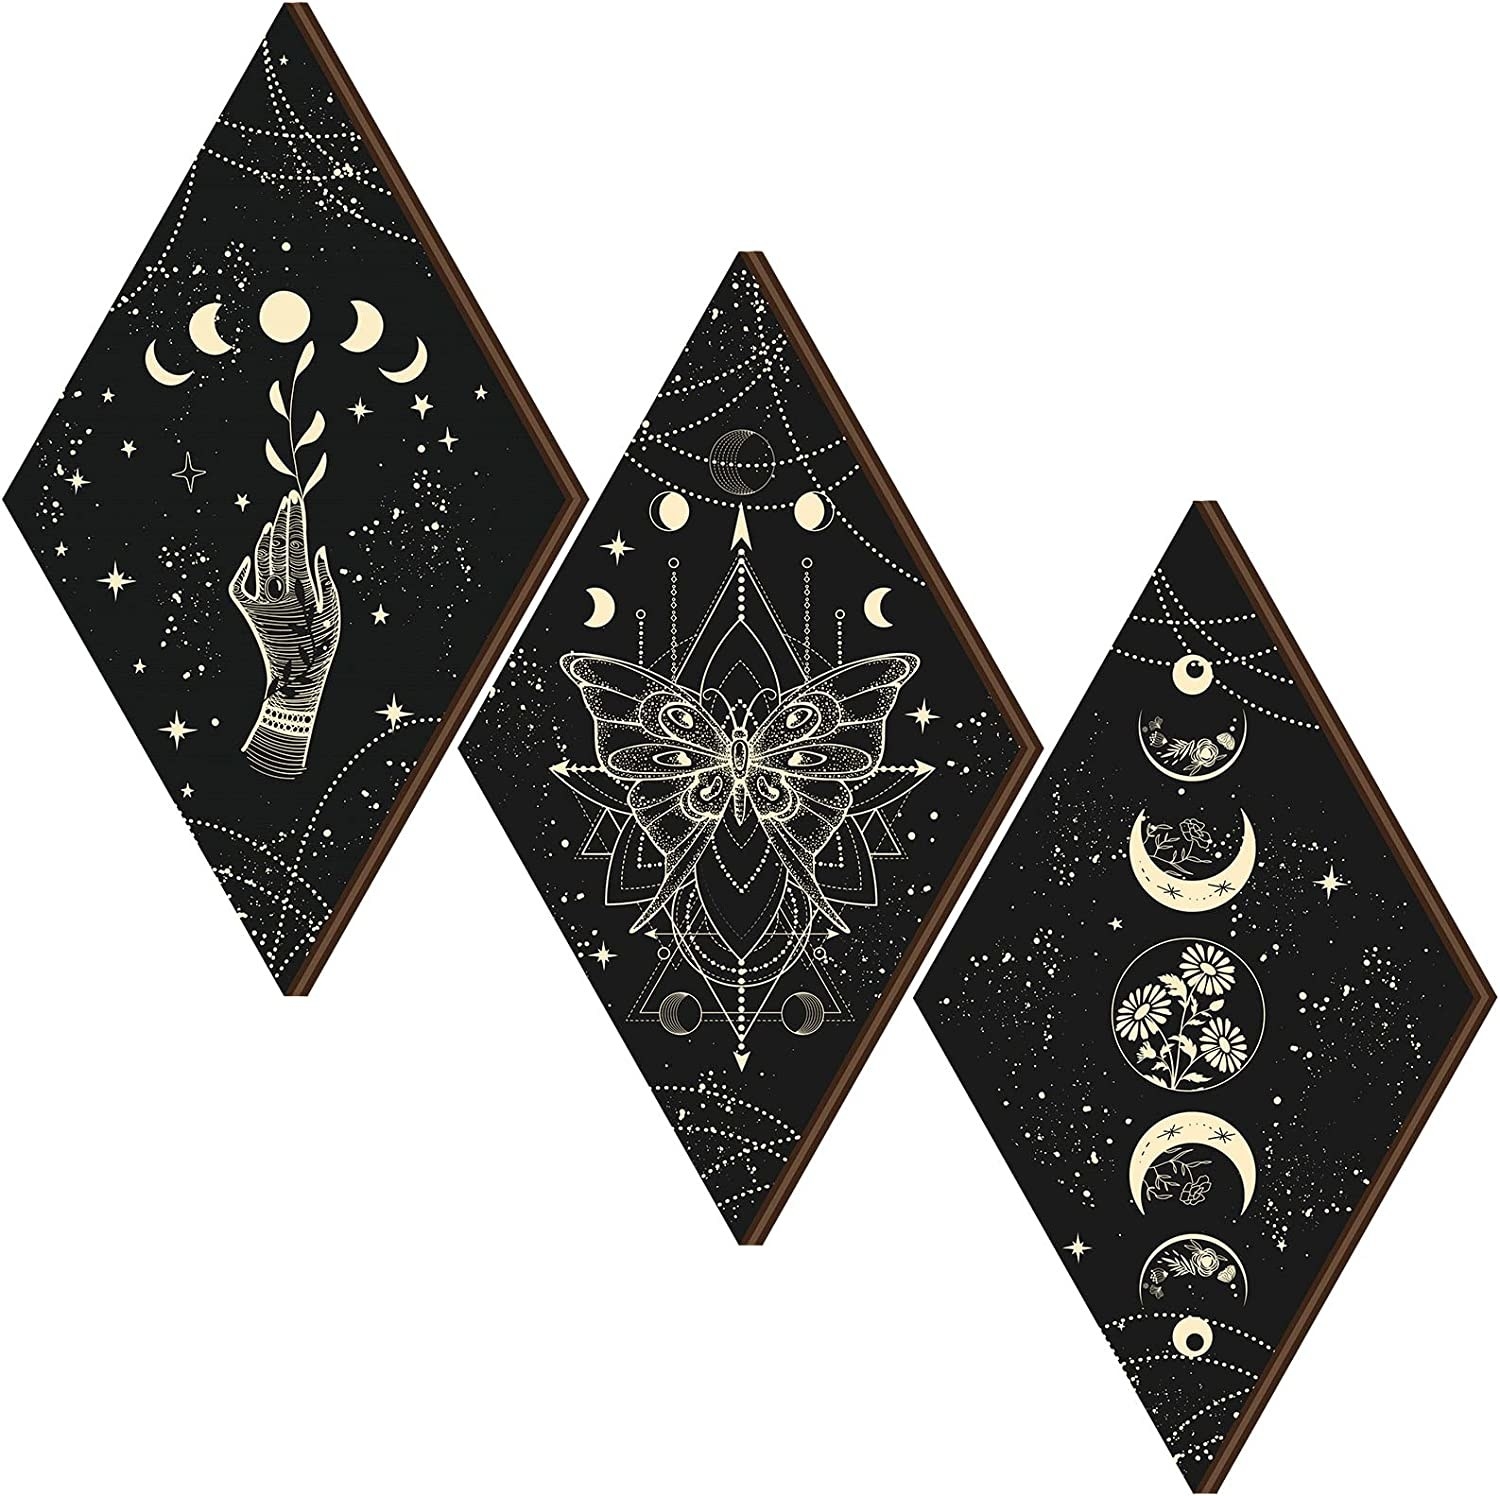 A set of three diamond-shaped pieces of wall art with celestrial and lunar themes